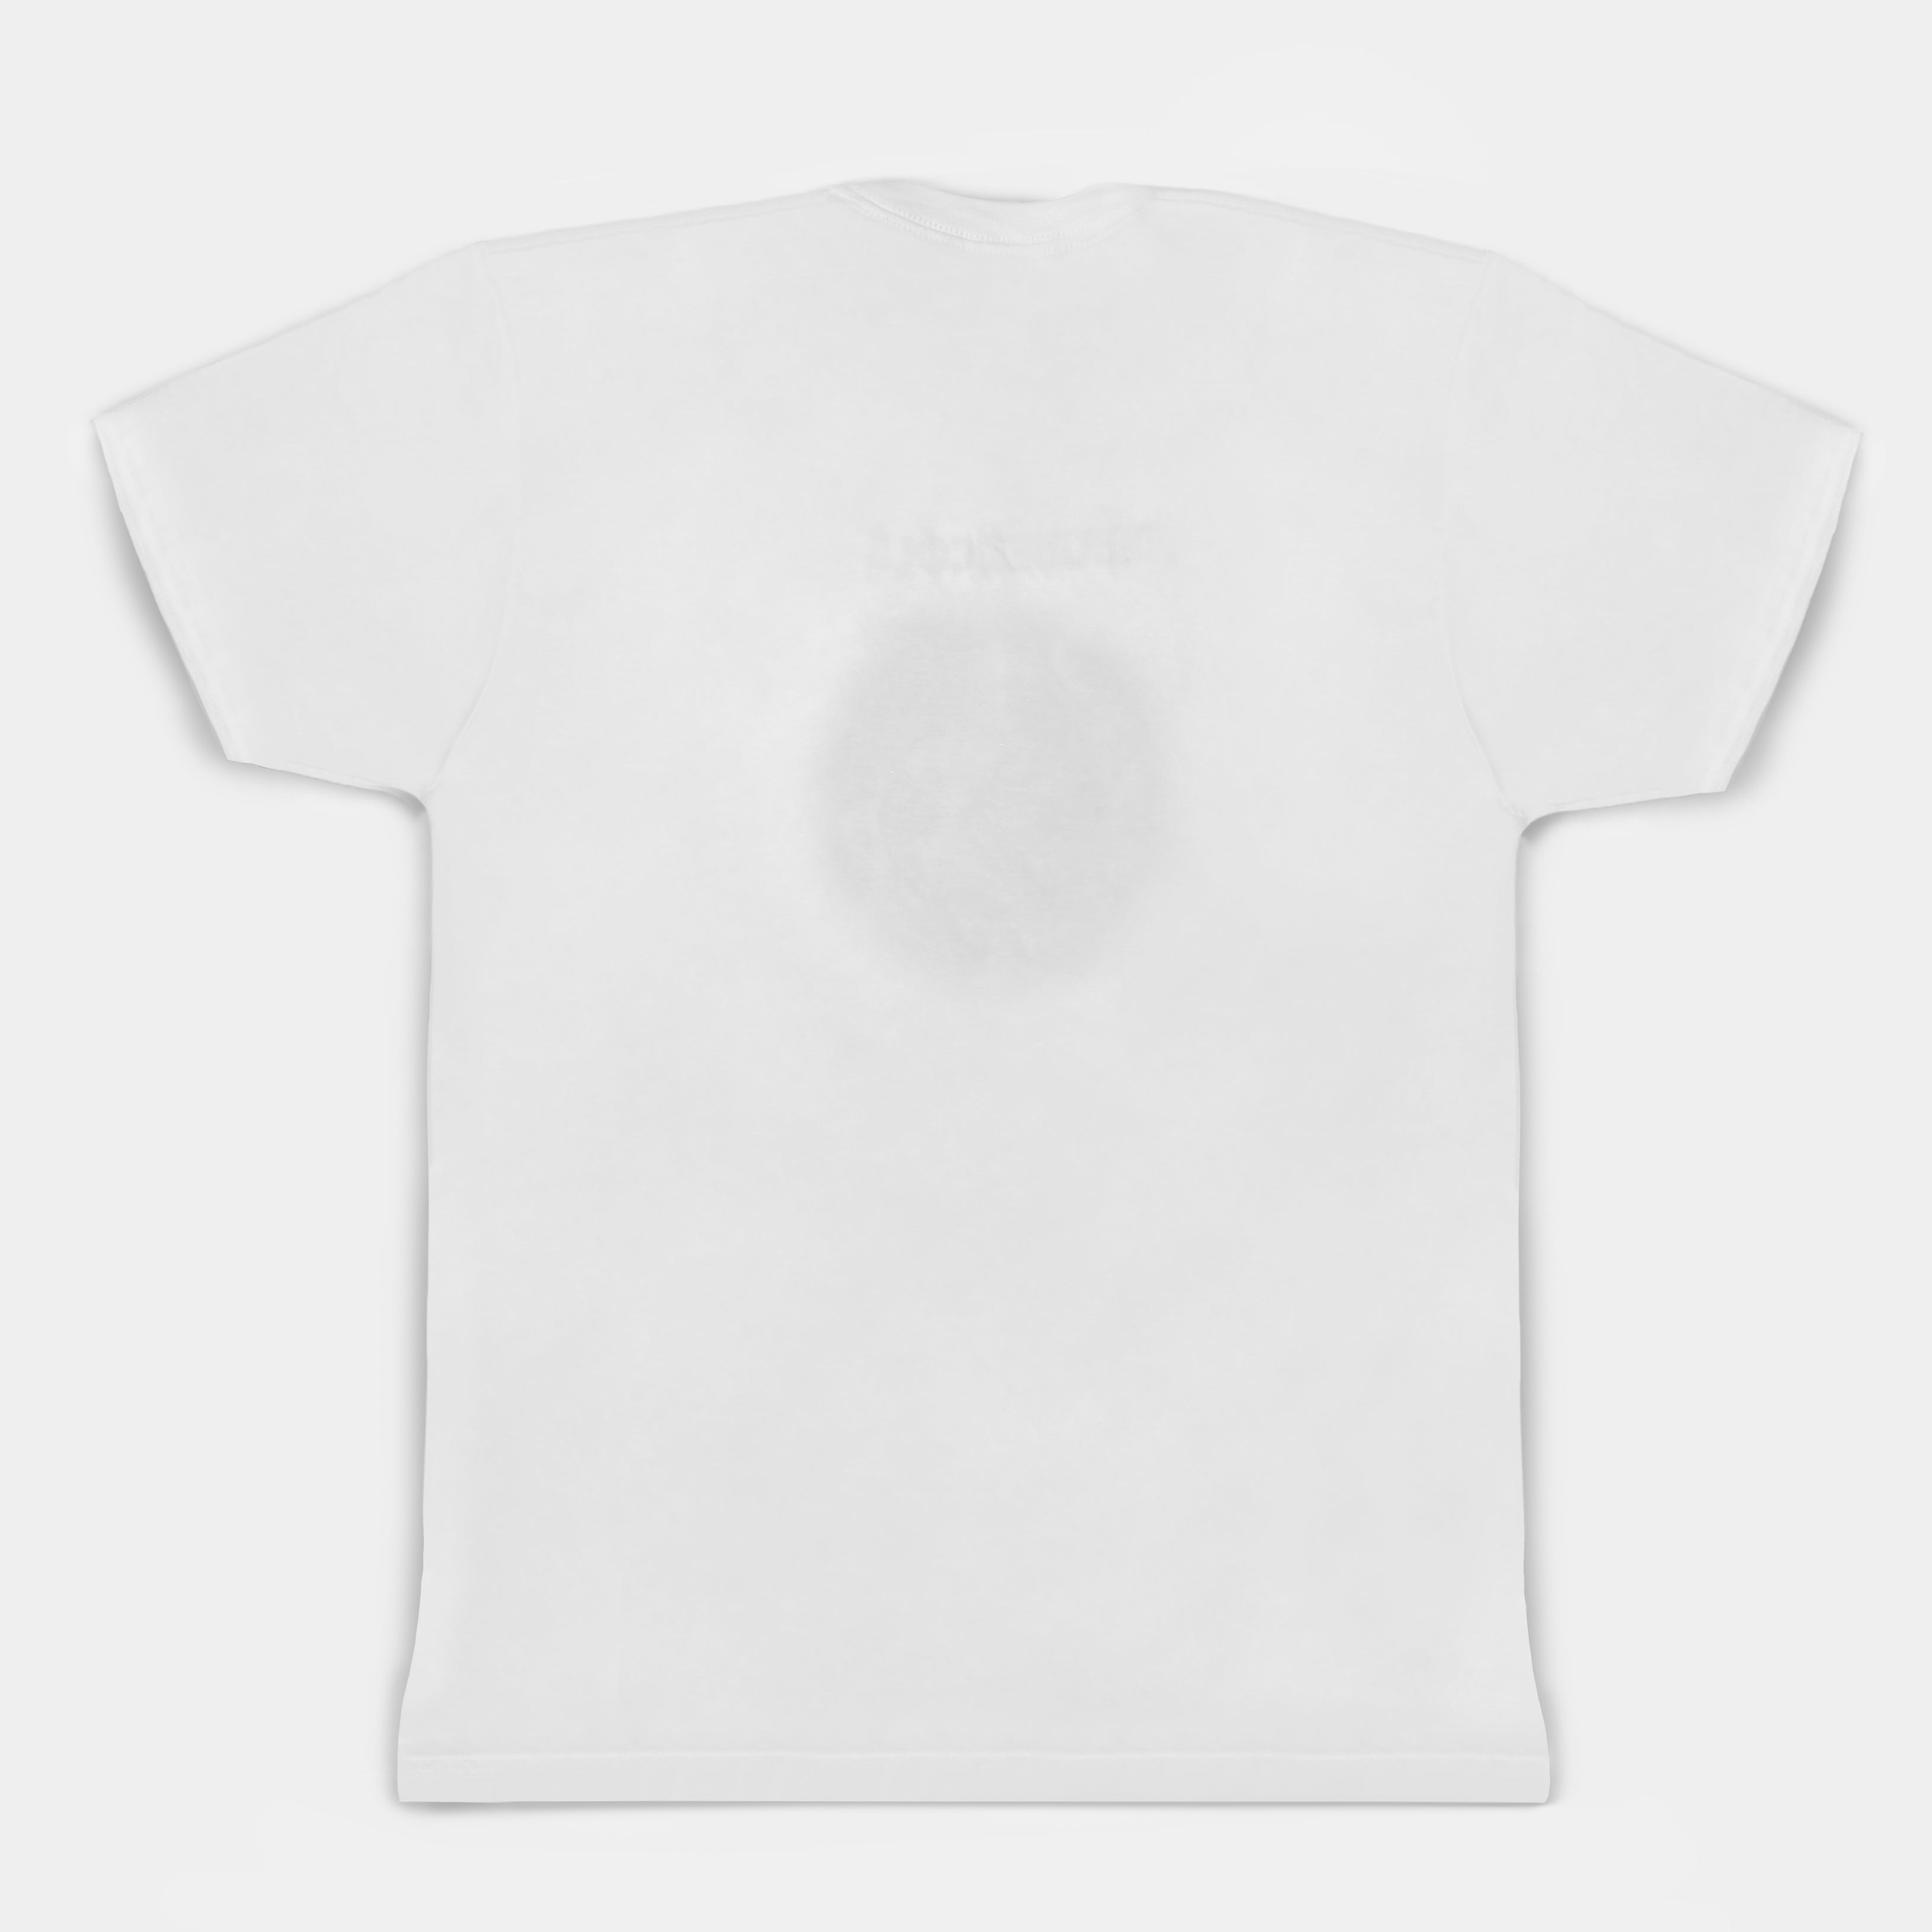 Rodriguez Cold Fact White T-Shirt